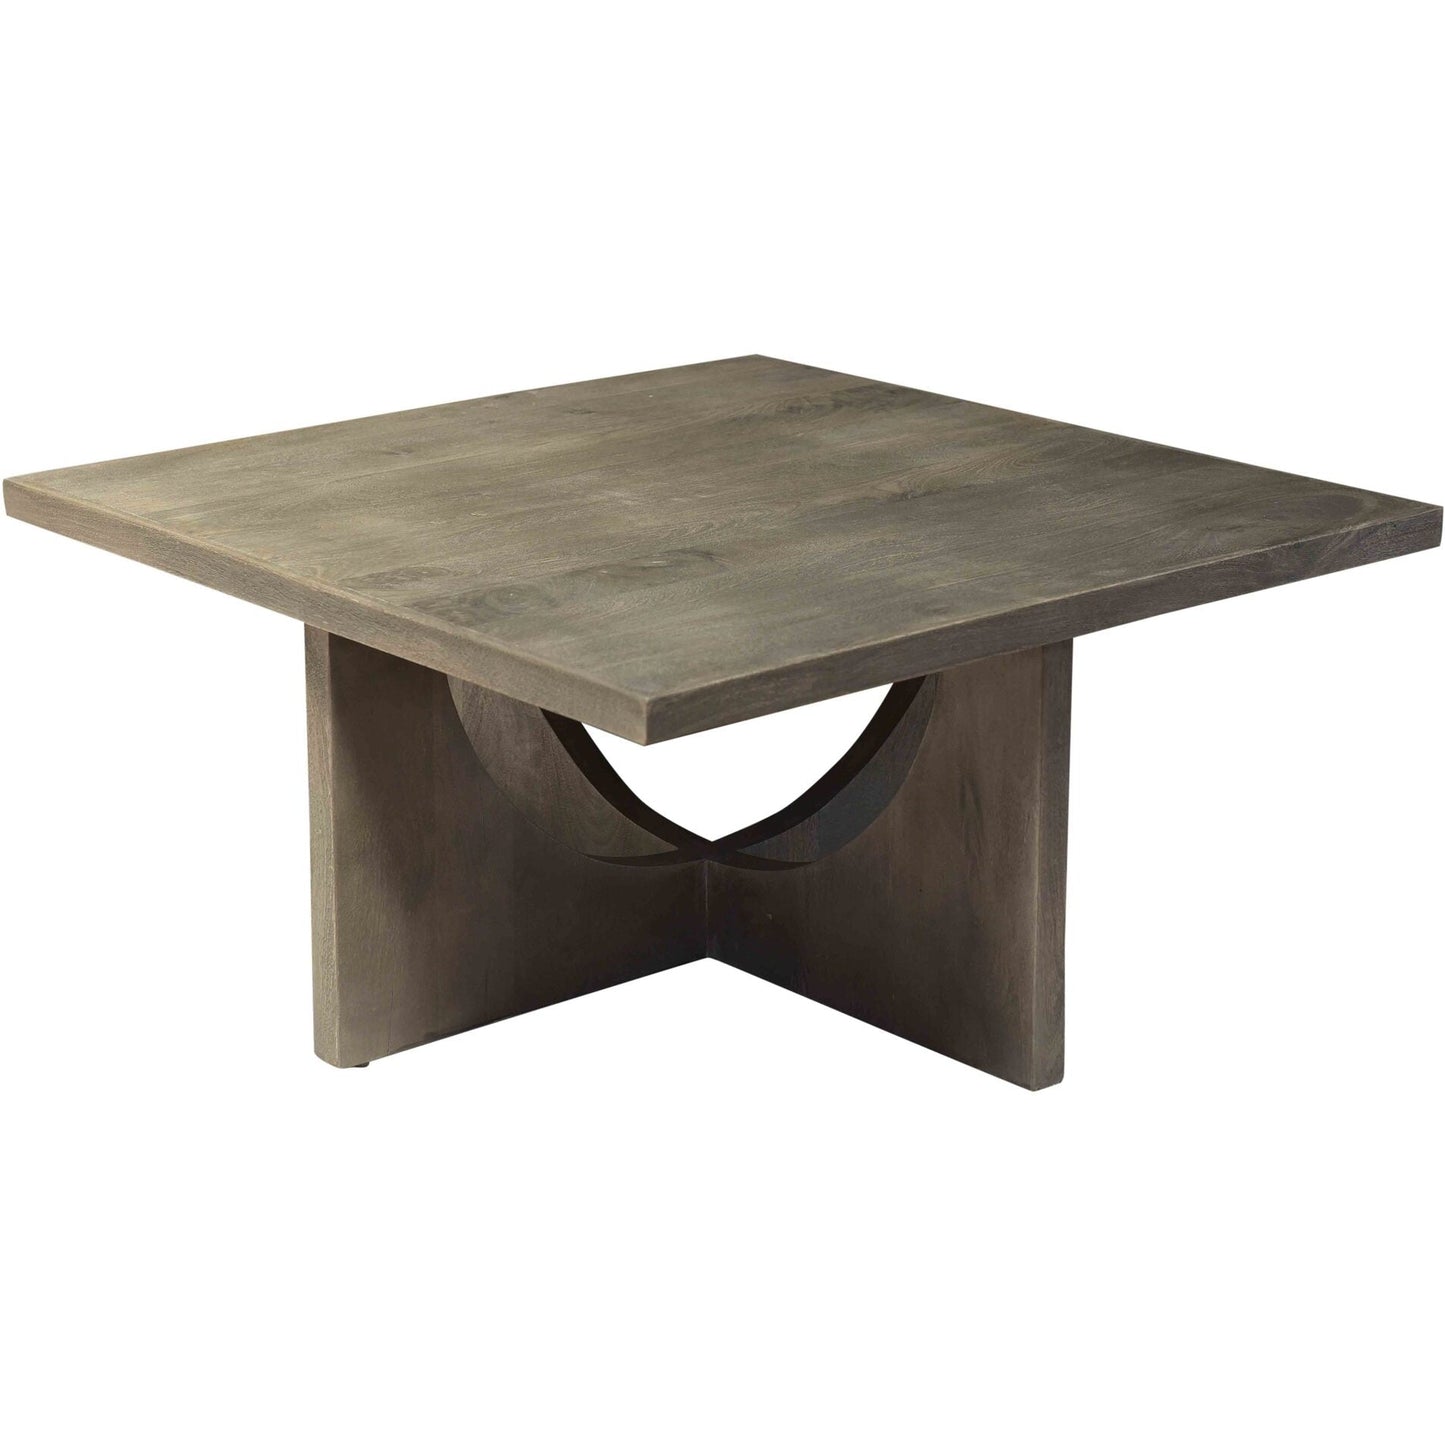 Crestview Collection Glenridge 38" x 38" x 19" Occasional Wood Cocktail Table